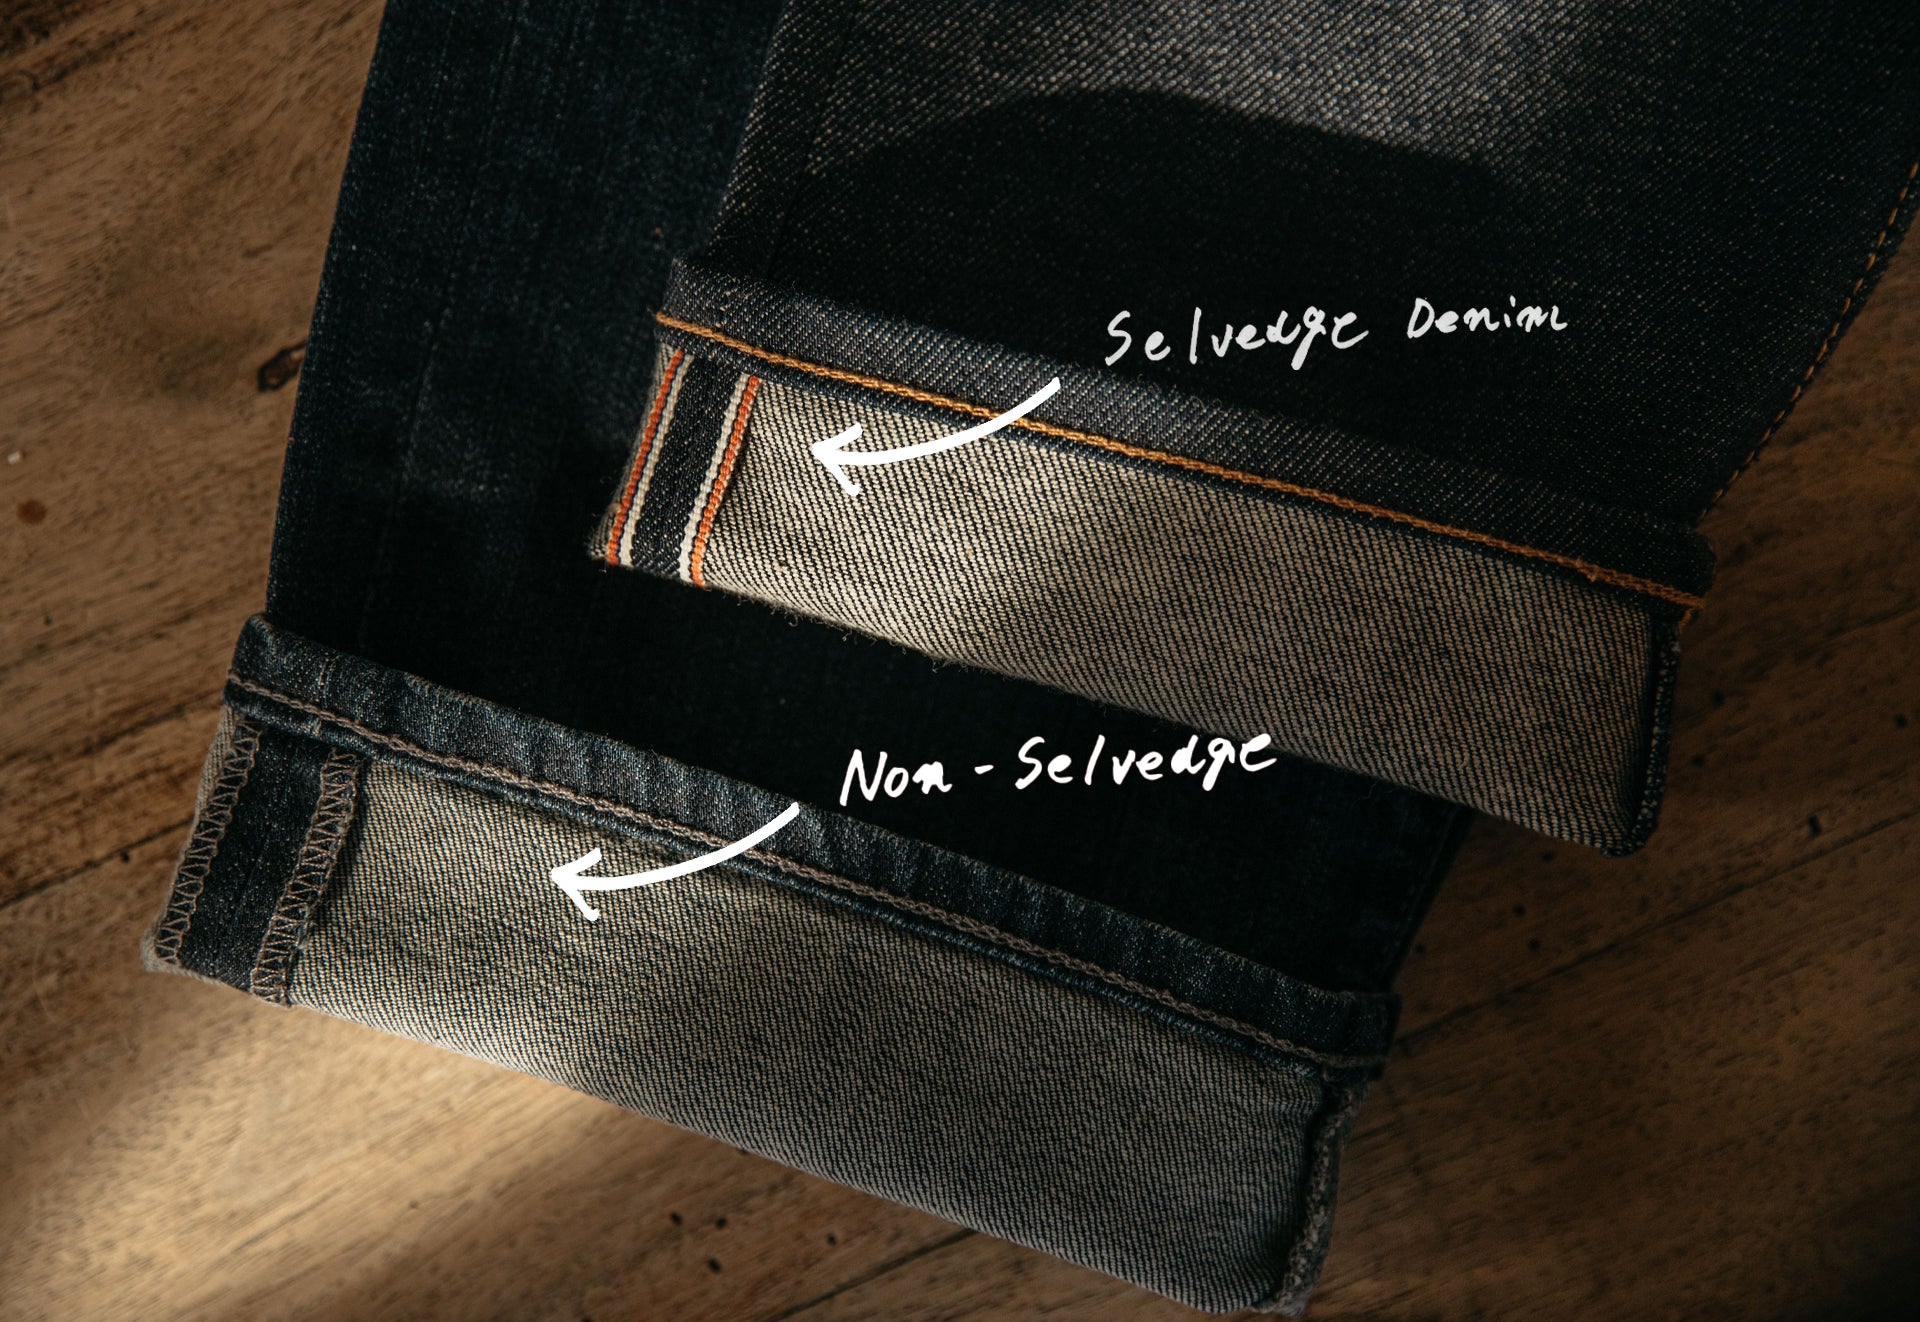 What is the difference between denim and non denim? - Quora